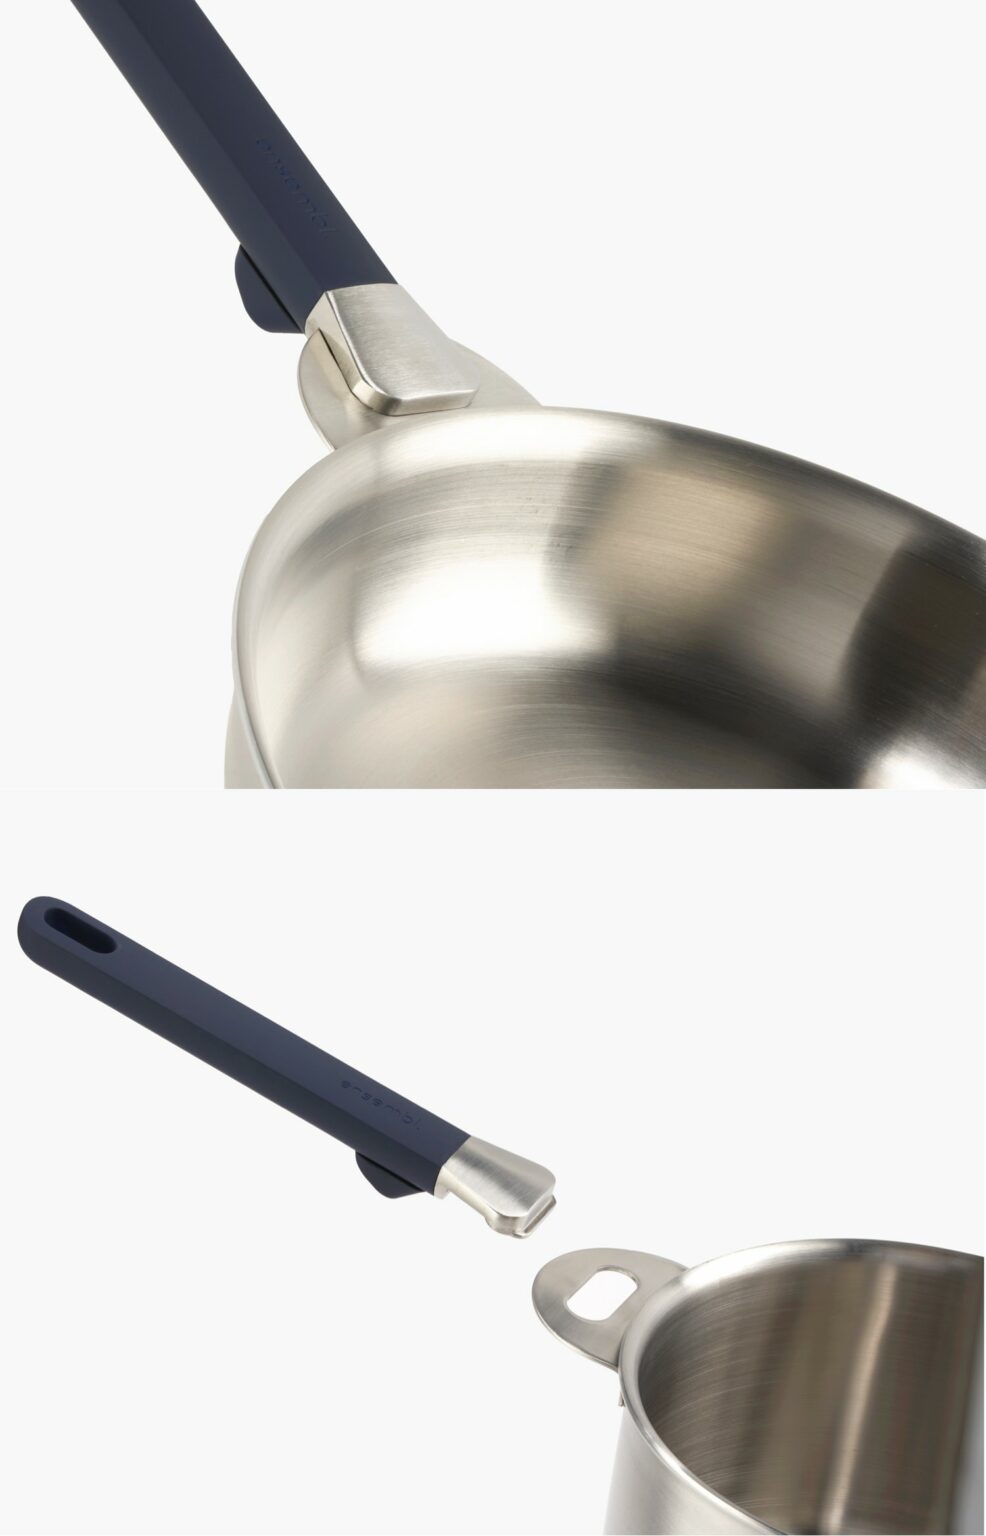 LEARN MORE about ENSEMBL Stainless Steel Fully Clad Stacking Cookware Set with removable handles. ENSEMBL’s patented removable handle is secure and easy to use and makes cookware multifunctional. Discover how it works. Frying Pan, Braiser Pan, Small Saucepan, Medium Saucepan, Stockpot, Steamer/Colander. Multifunctional, long-lasting, design-forward home wares. Oven-safe cookware set. Induction-safe cookware set.